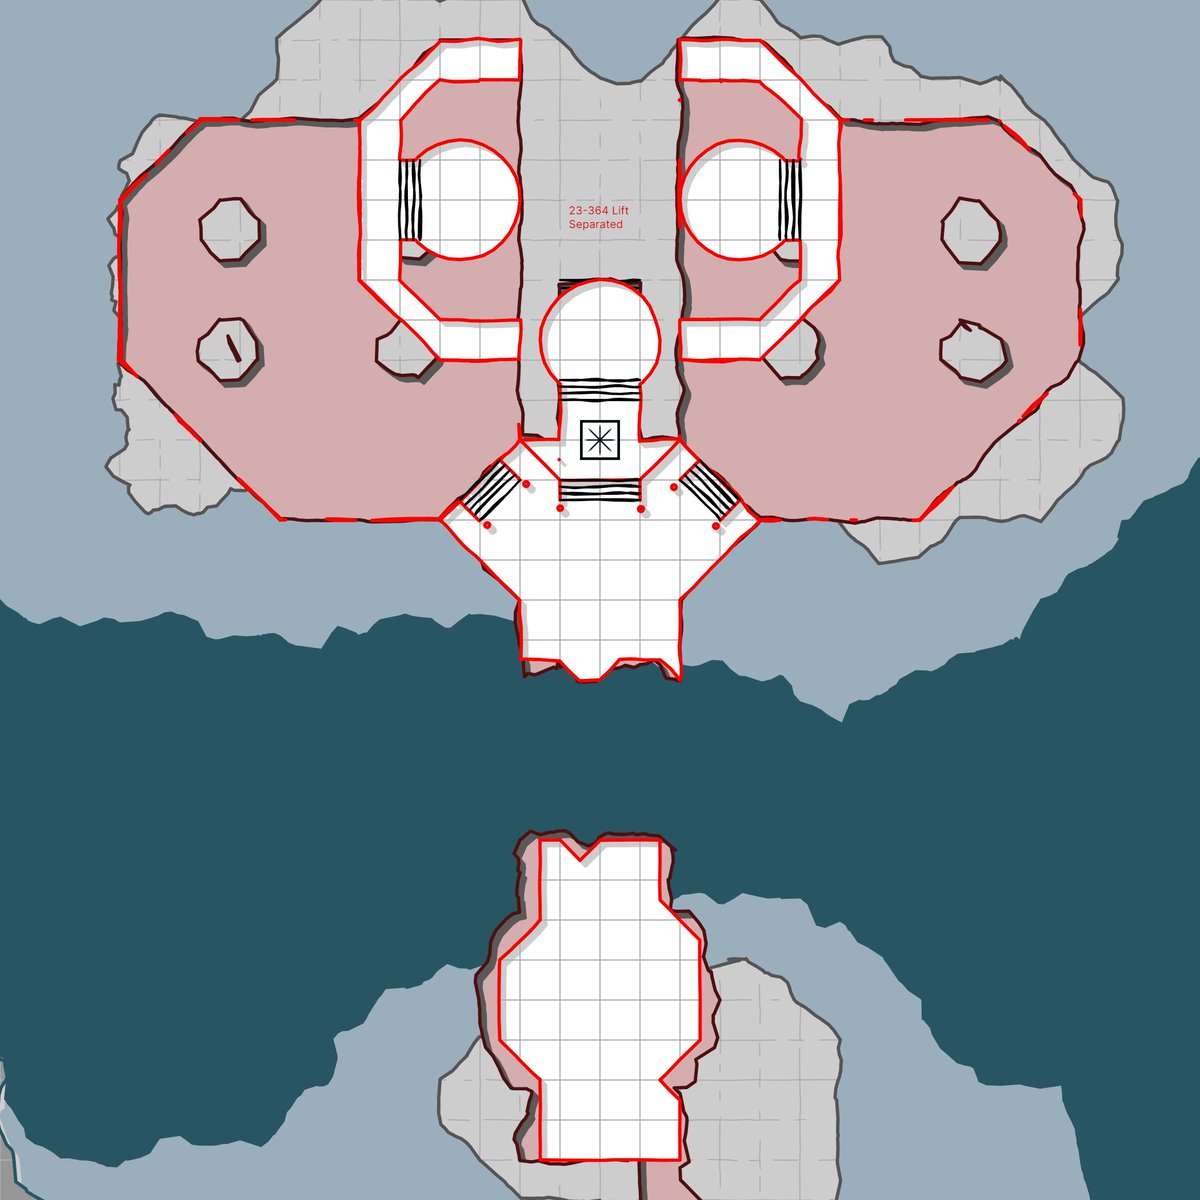 #dungeon23 
23-364 Lift (Separated)

With every step on these sacred floors,
Hearts will skip, when tension soars.
And atop the altars on the three cairn mounds, 
lays a granite brow, fit for three golden crowns.